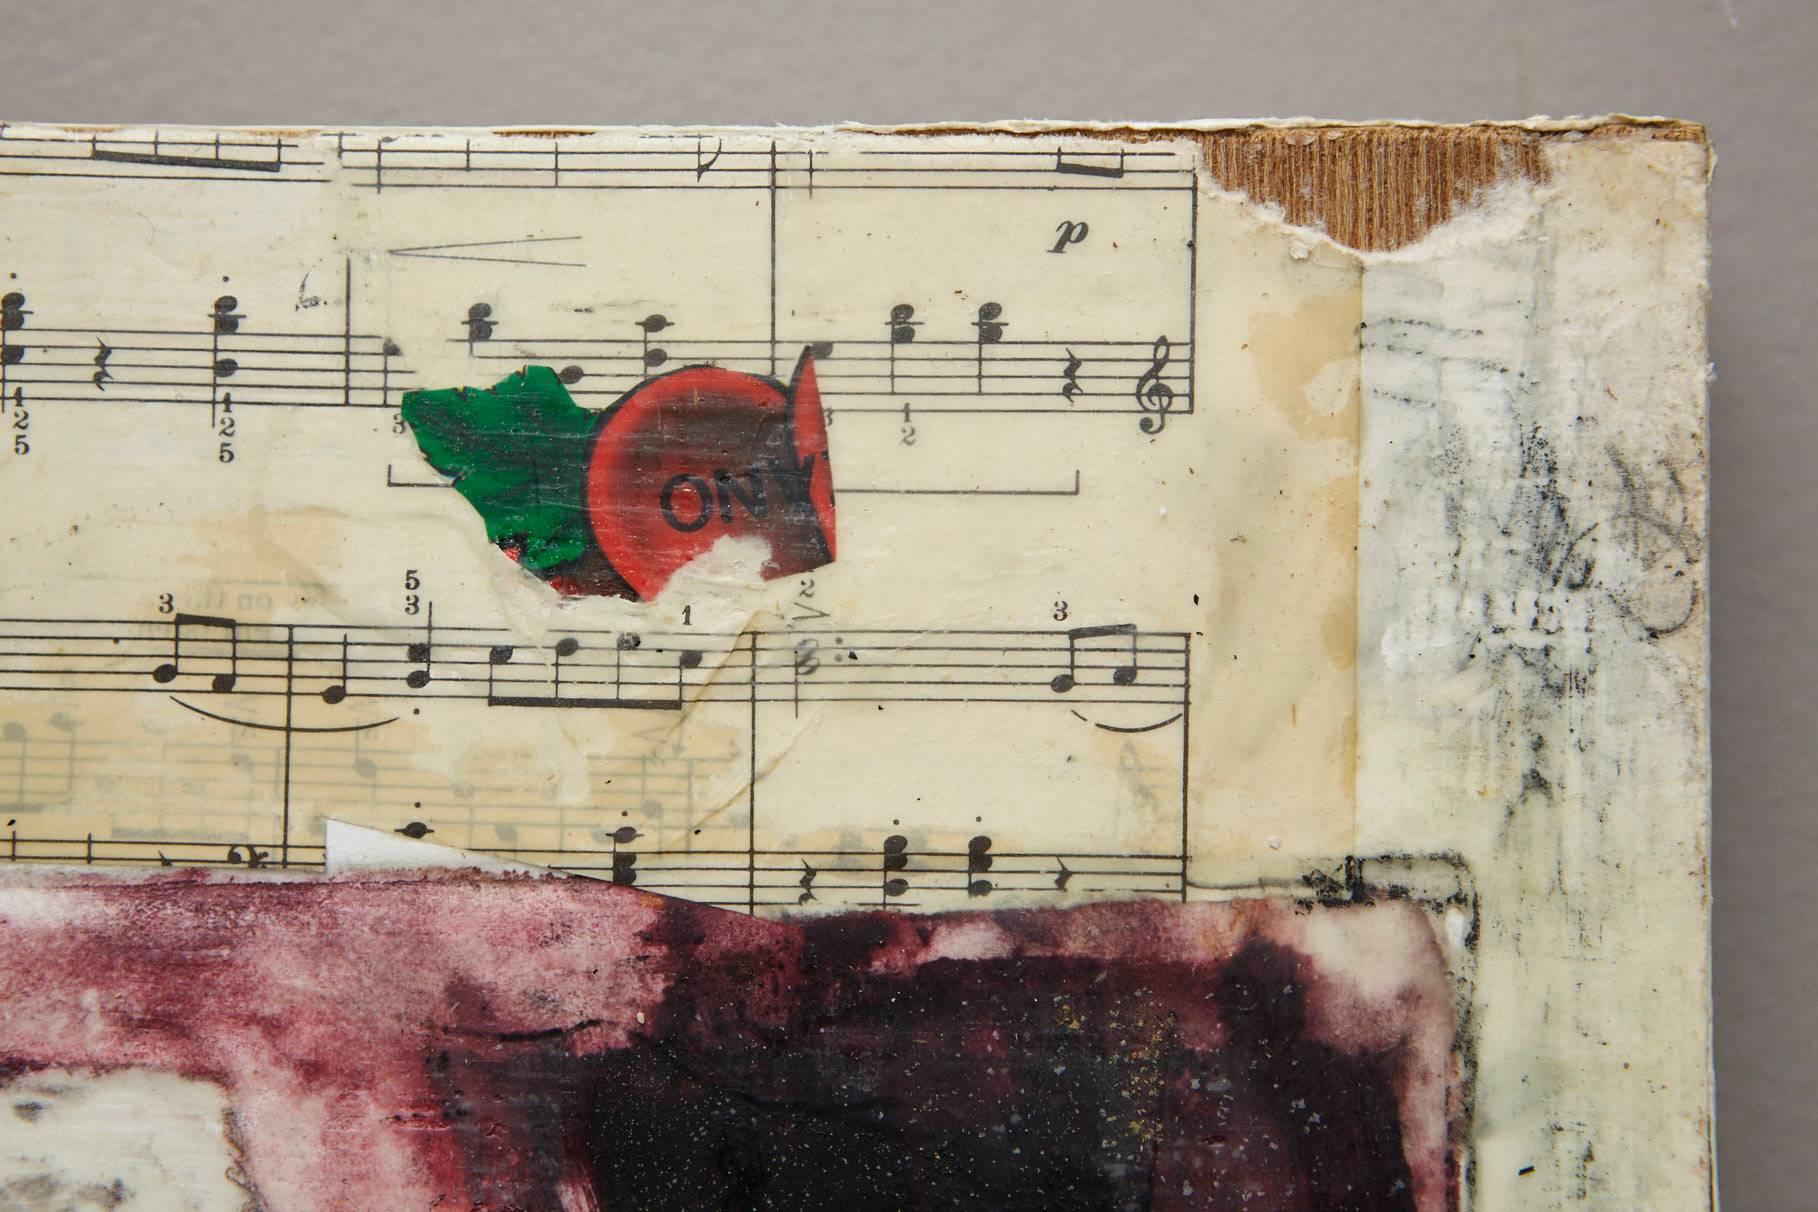 Mixed Media. Collage on wood board, ink, crayon, found objects, encaustic. Signed lower right, sticker on back with title, year and name.

Riva Leviten (American 1928-2014) was born in Hollywood, California and spent most of her life active in the